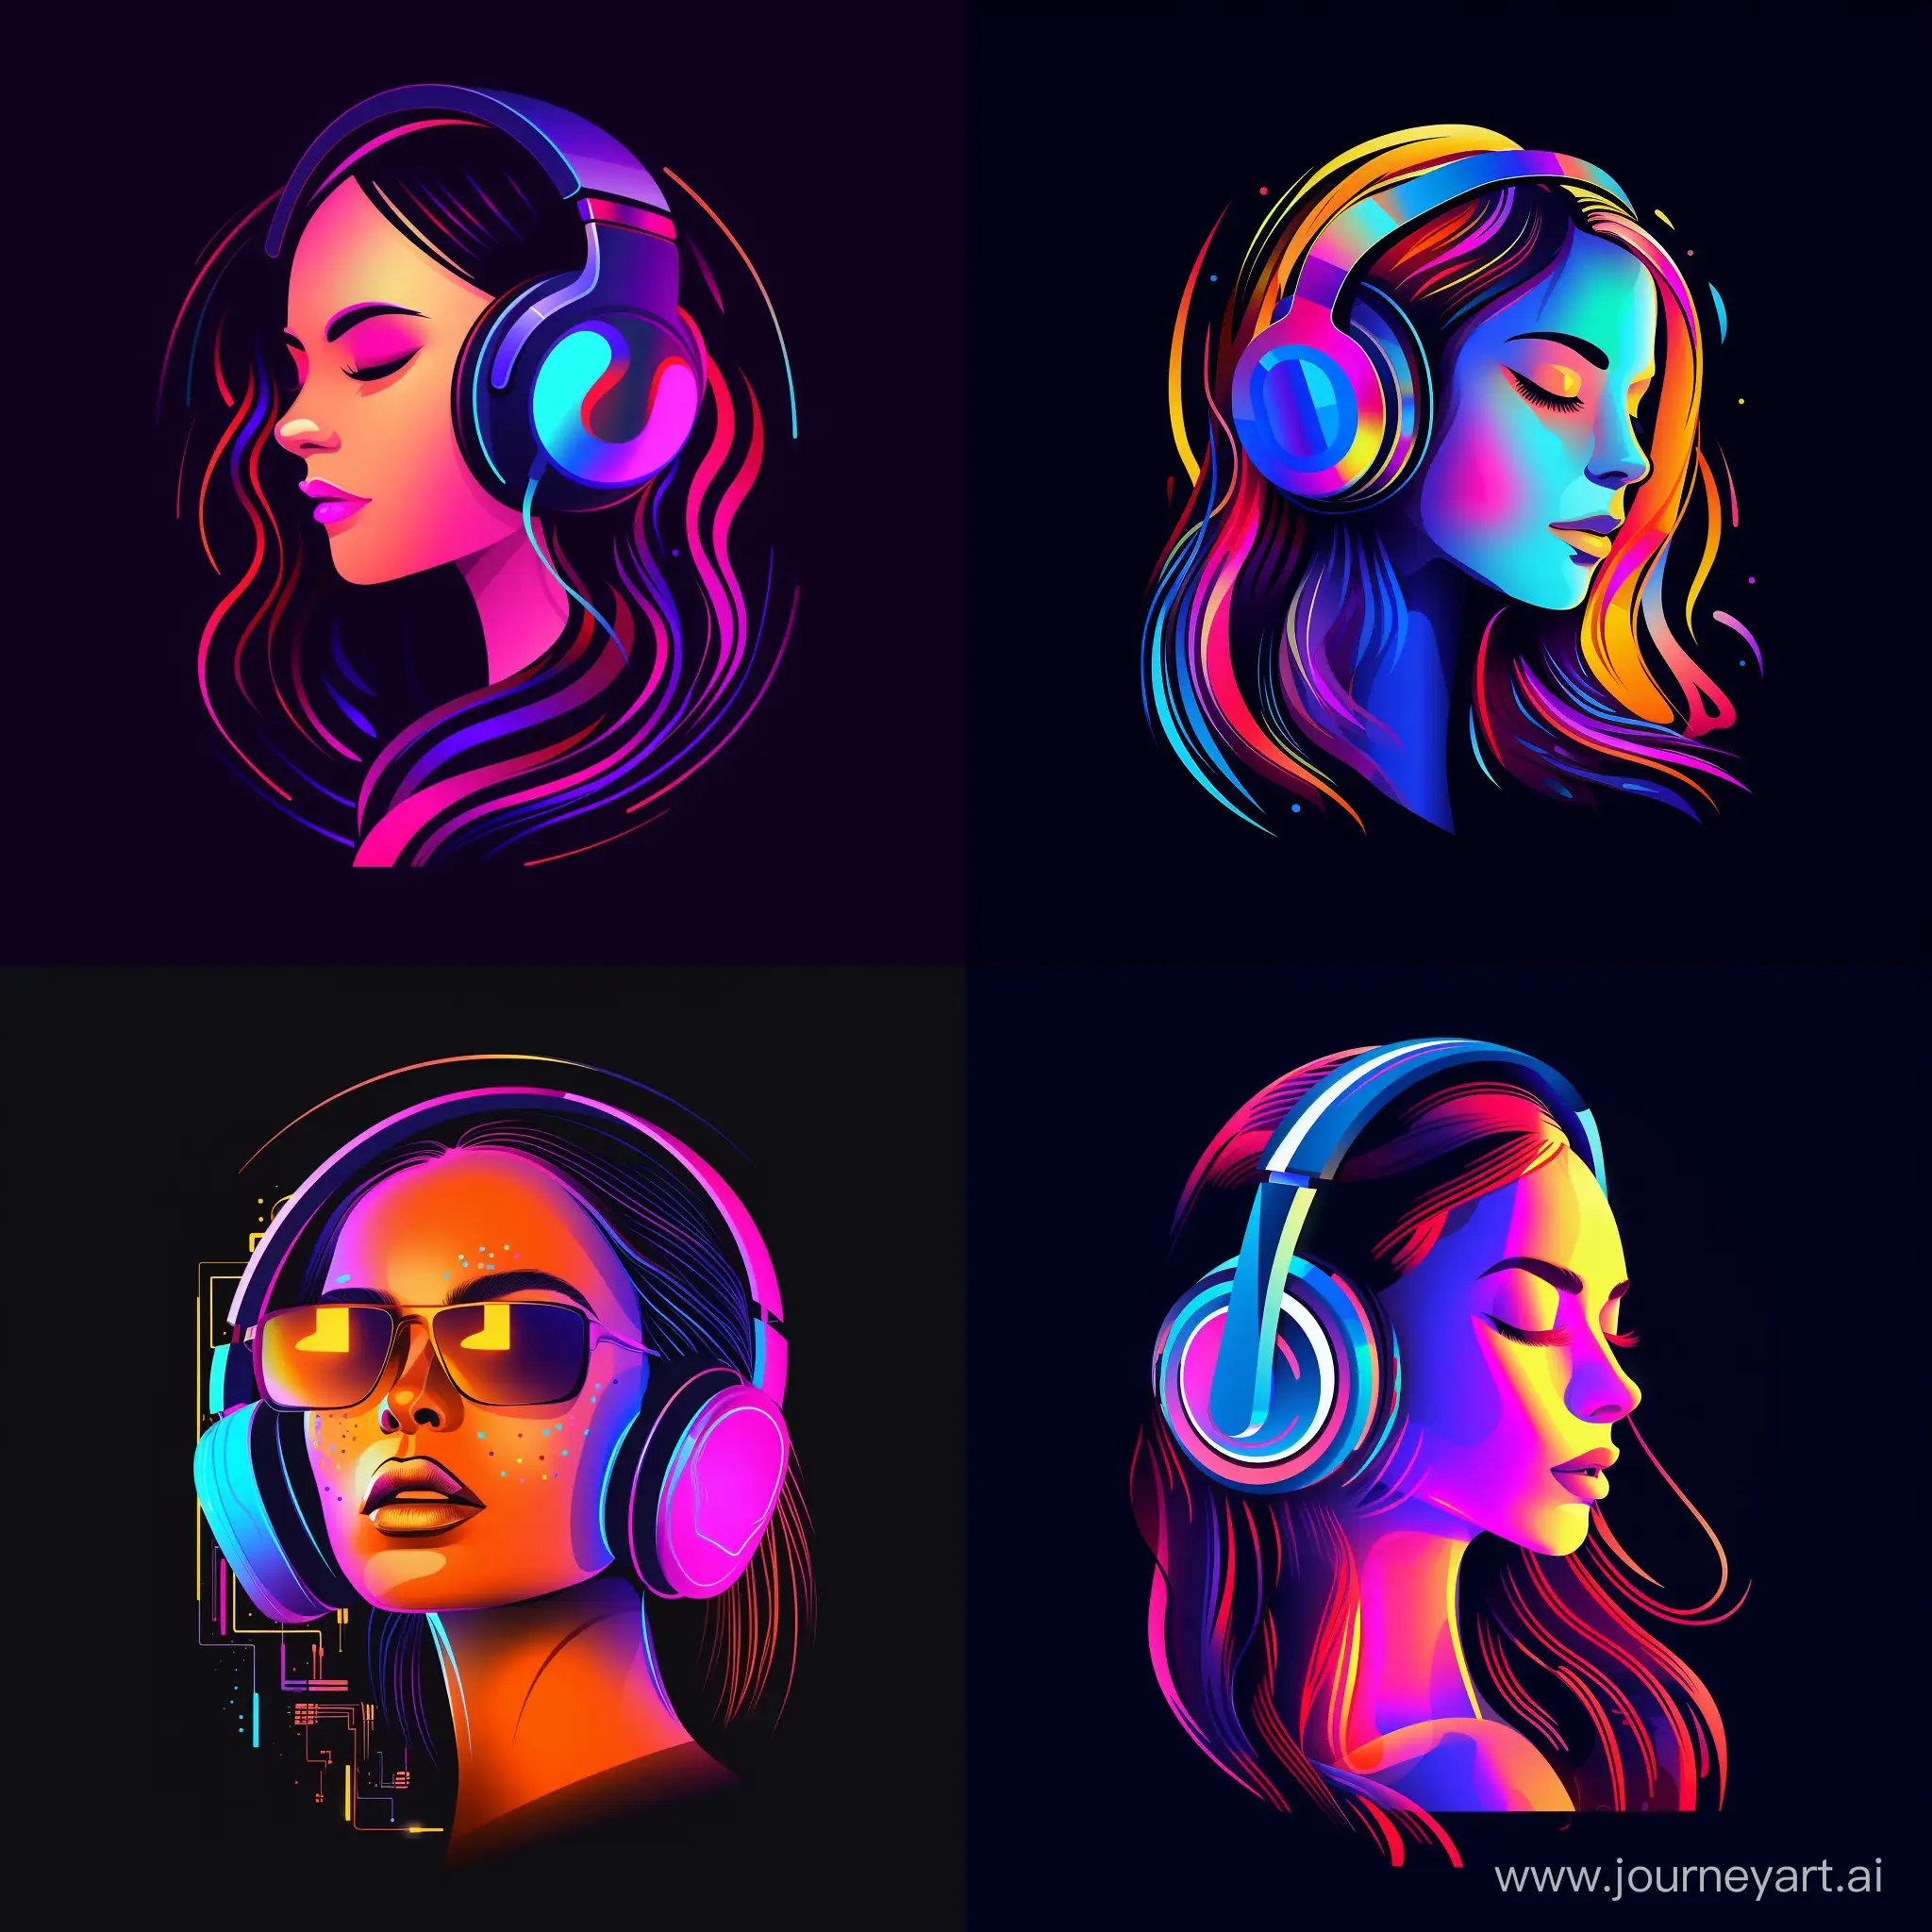 minimalistic logo of woman with headphones on her head, in vector style, neon bright colors